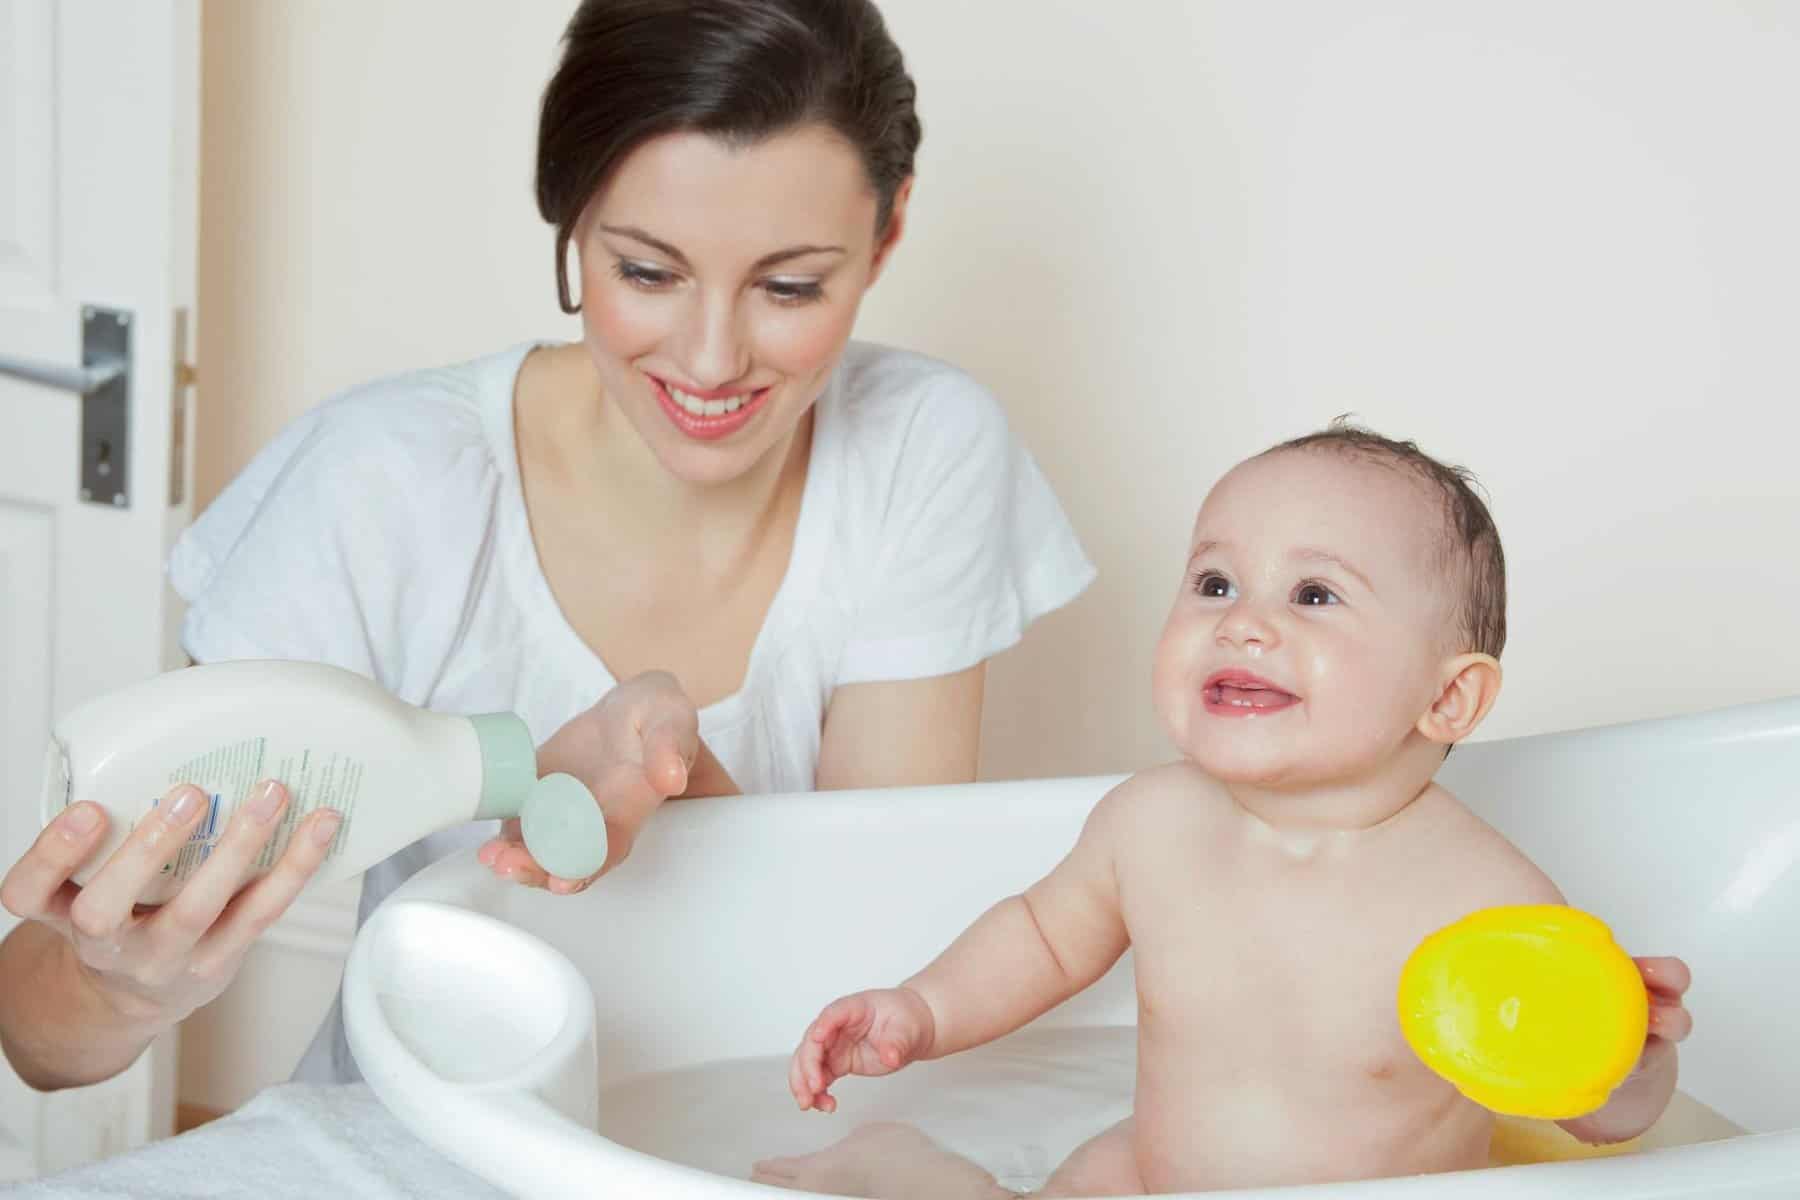 10 Tips For Setting Up Your Baby's Bathing Area - Baby Bath Moments